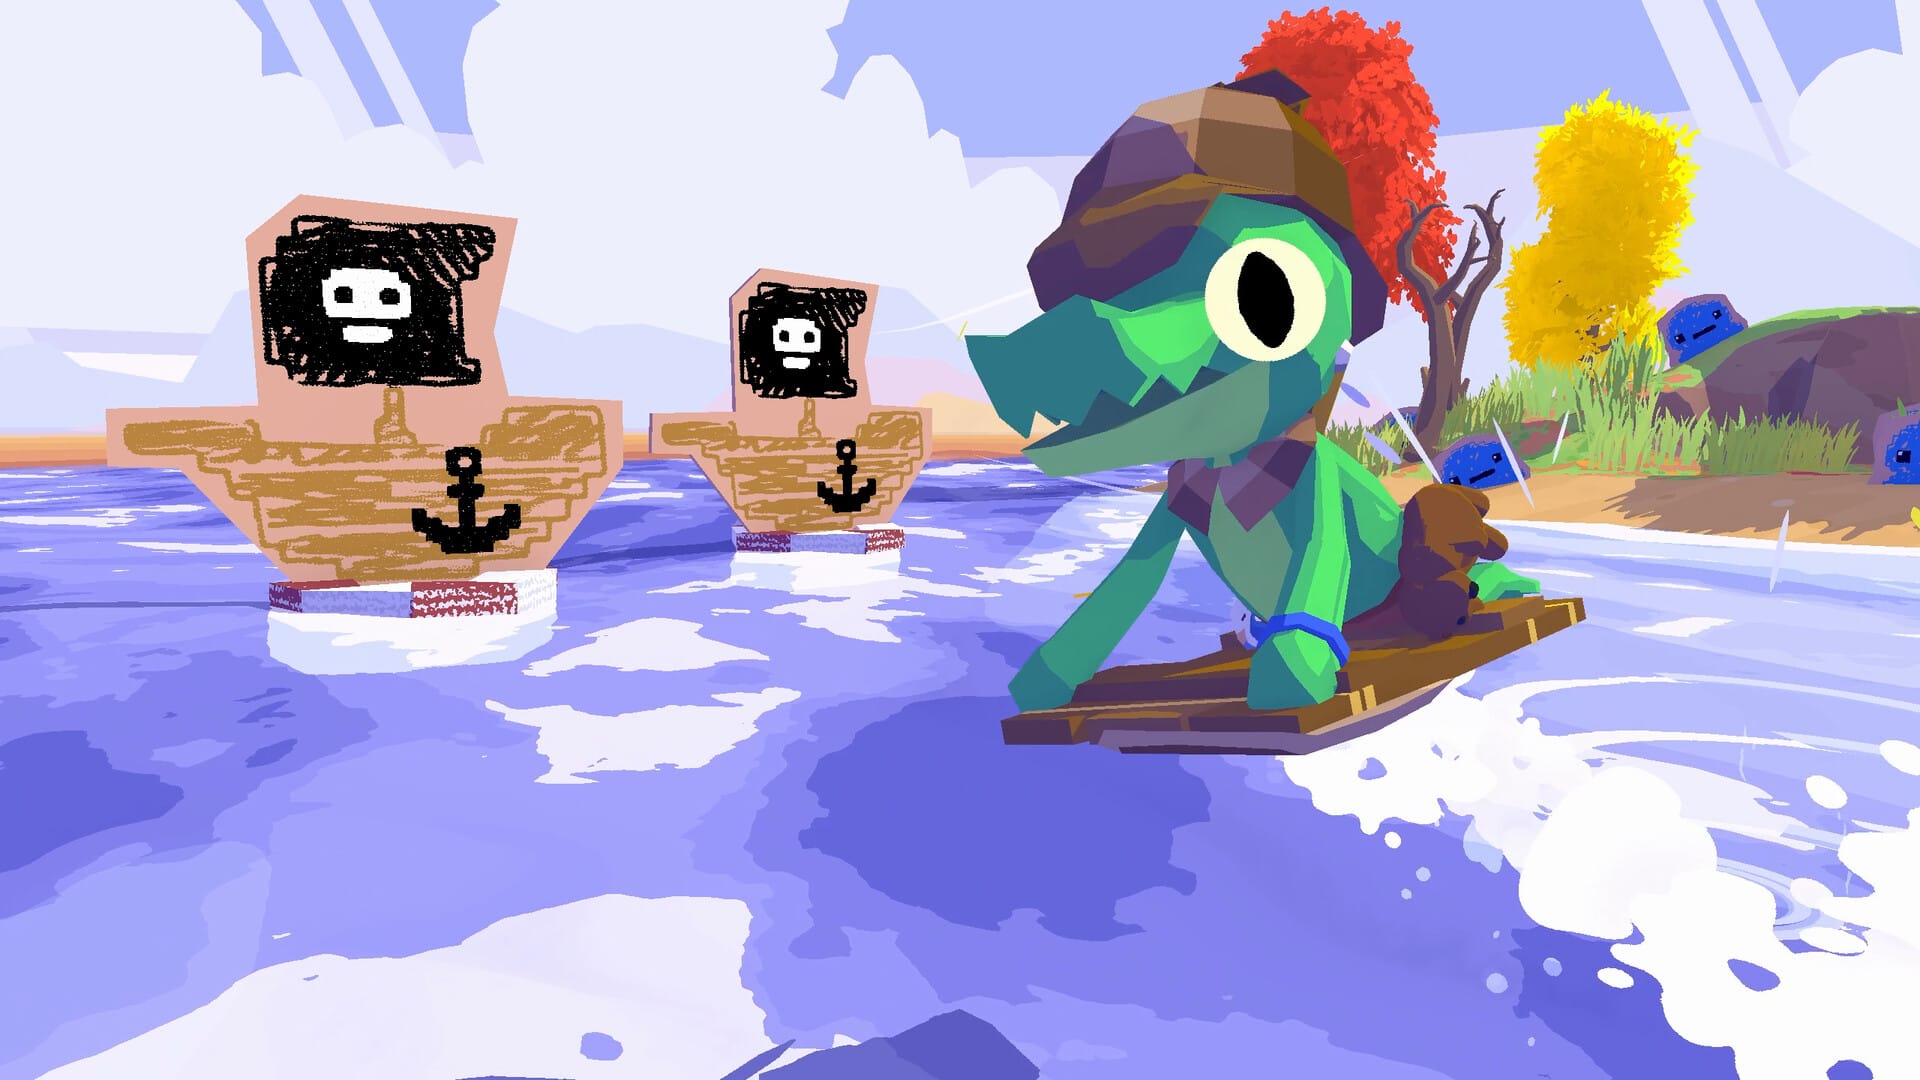 The gator from Lil Gator Game surfing on a river on a wooden board in front of cardboard cutouts of ships.